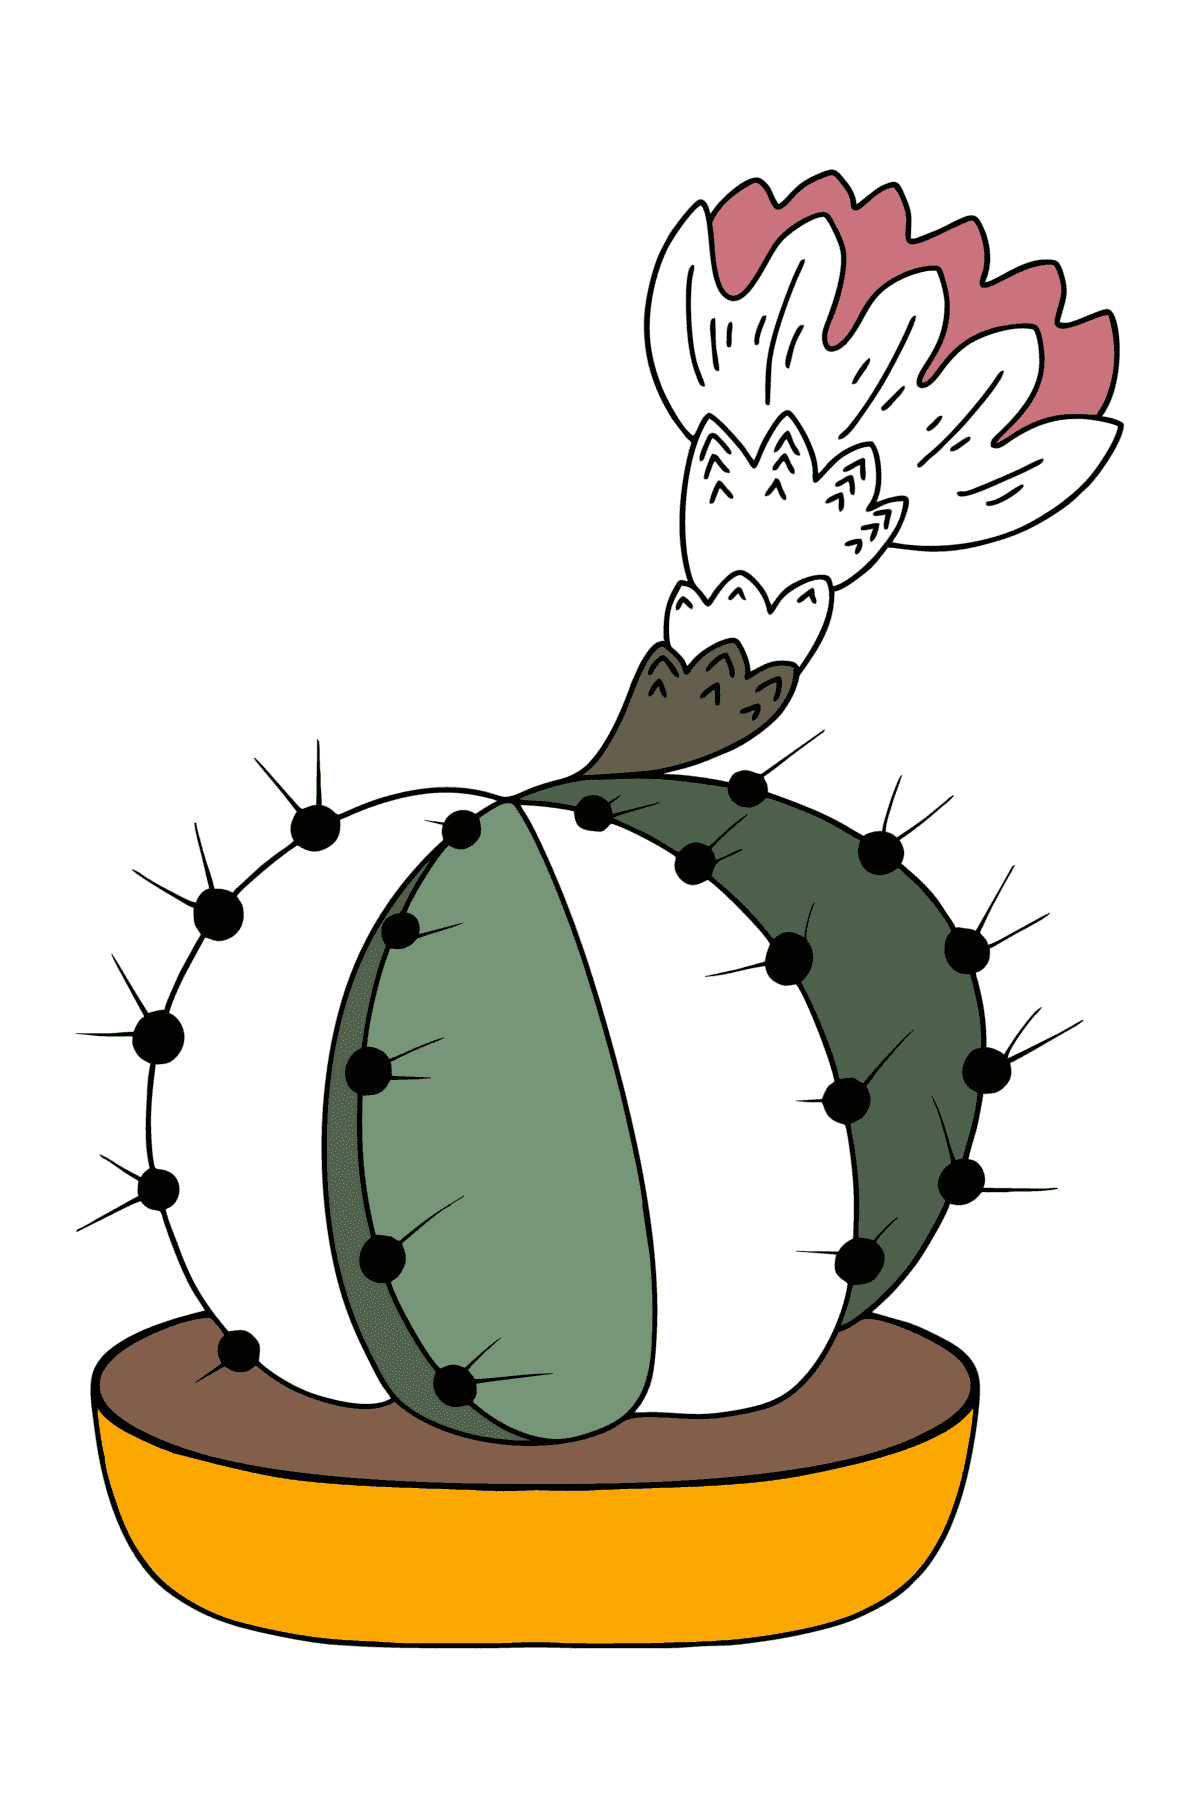 Cute cactus colouring pages - Coloring Pages for Kids